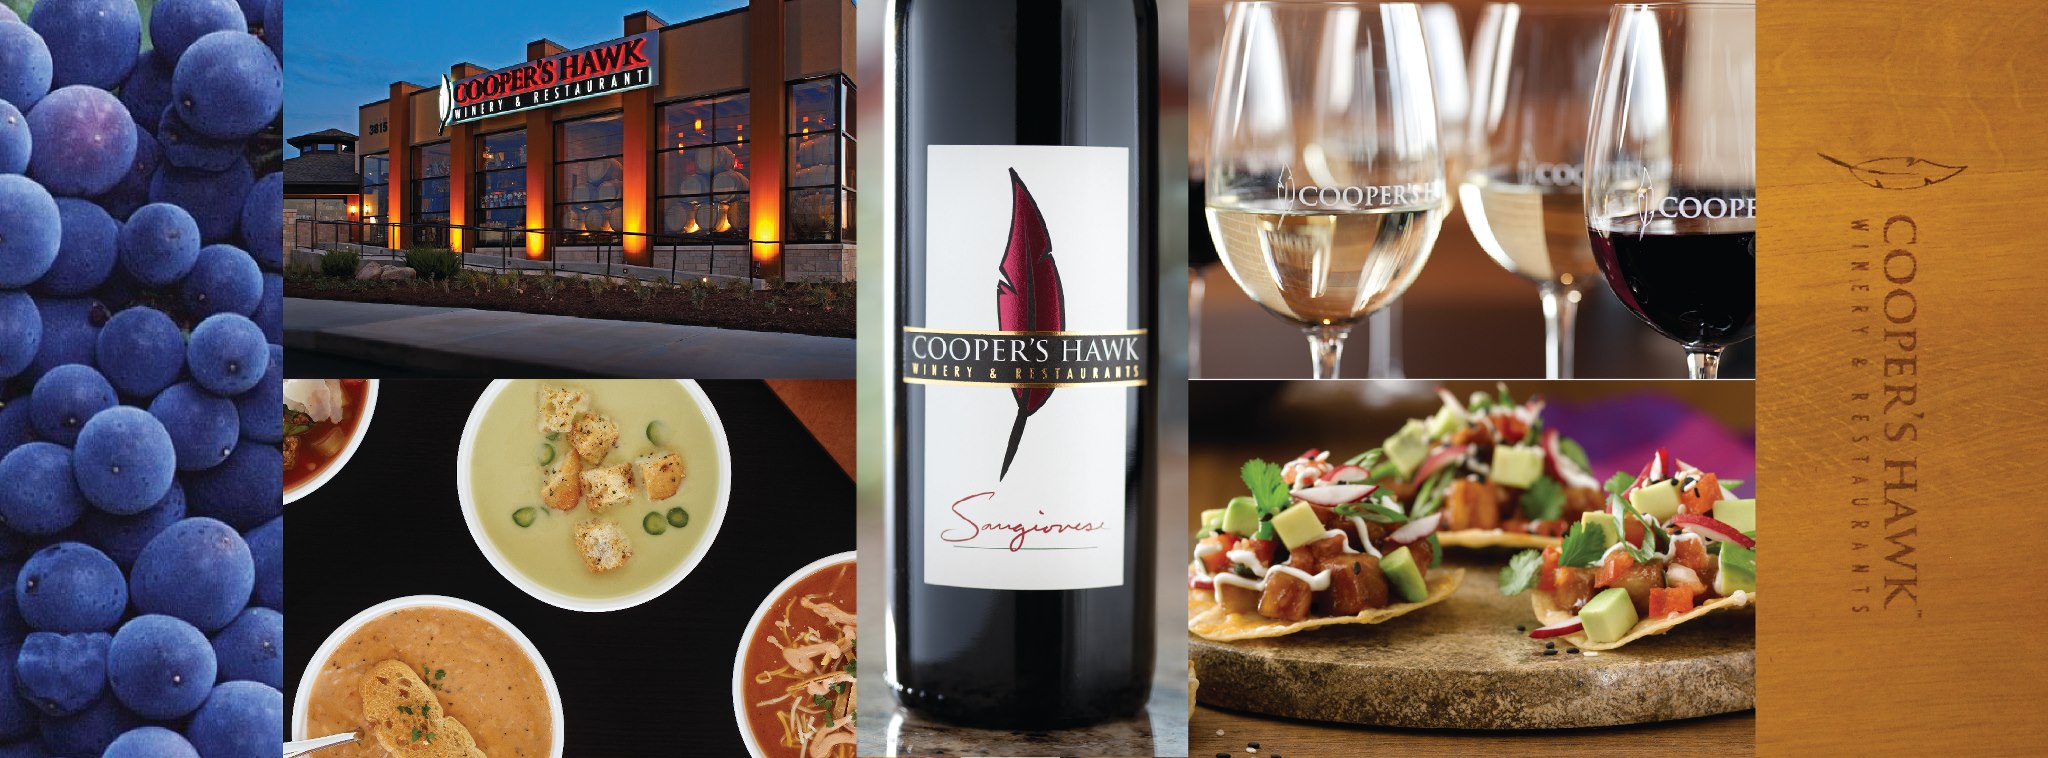 Cooper's Hawk Winery and Restaurant to land in Schererville